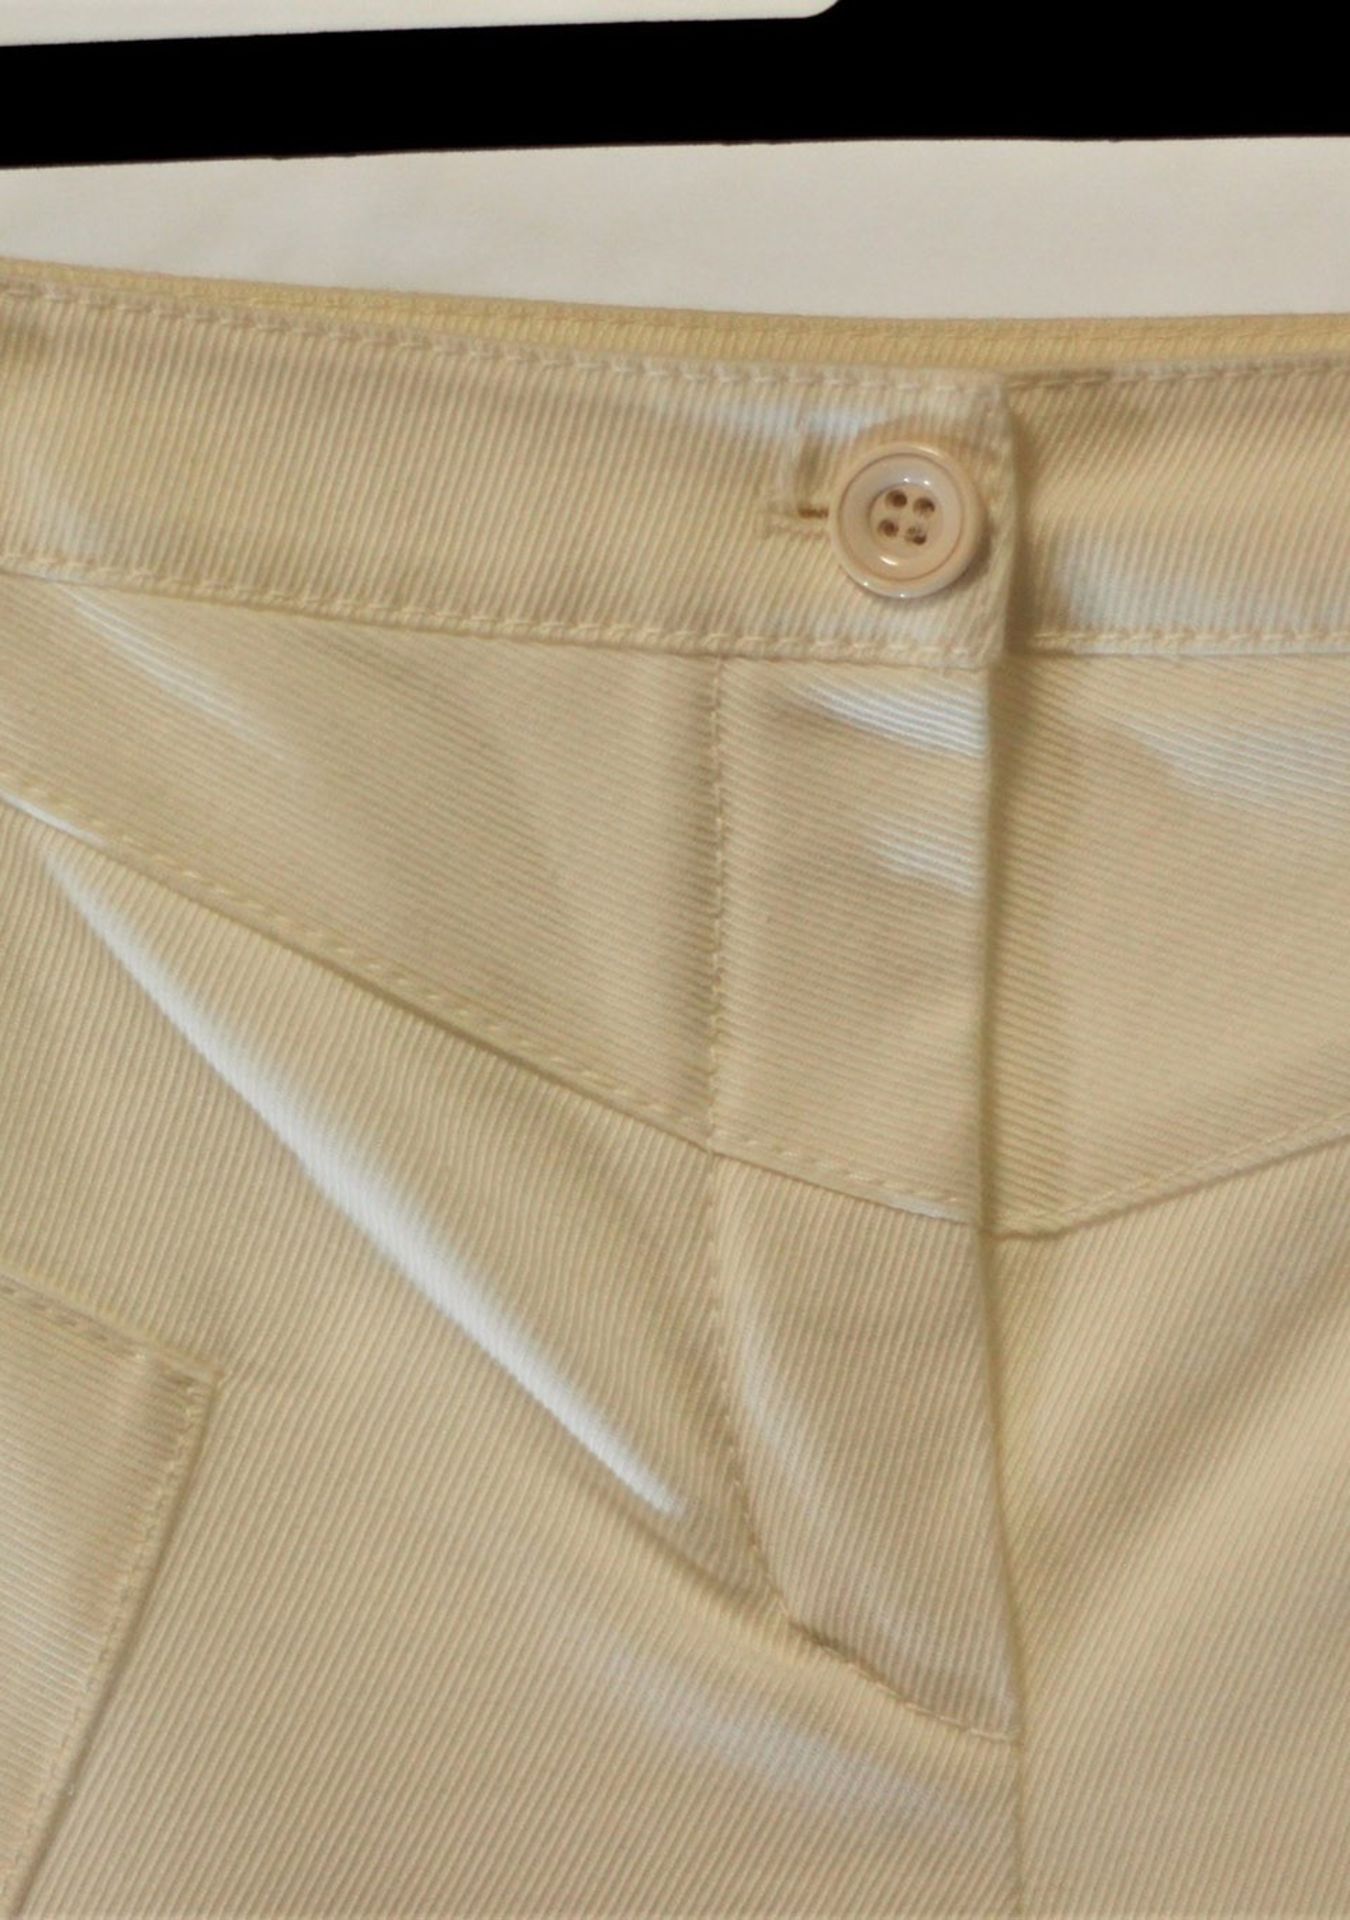 1 x Valentino Cream Trousers - Size: 14 - Material: 98% Cotton, 2% Elastane. Lining 100% Polyester - - Image 3 of 5